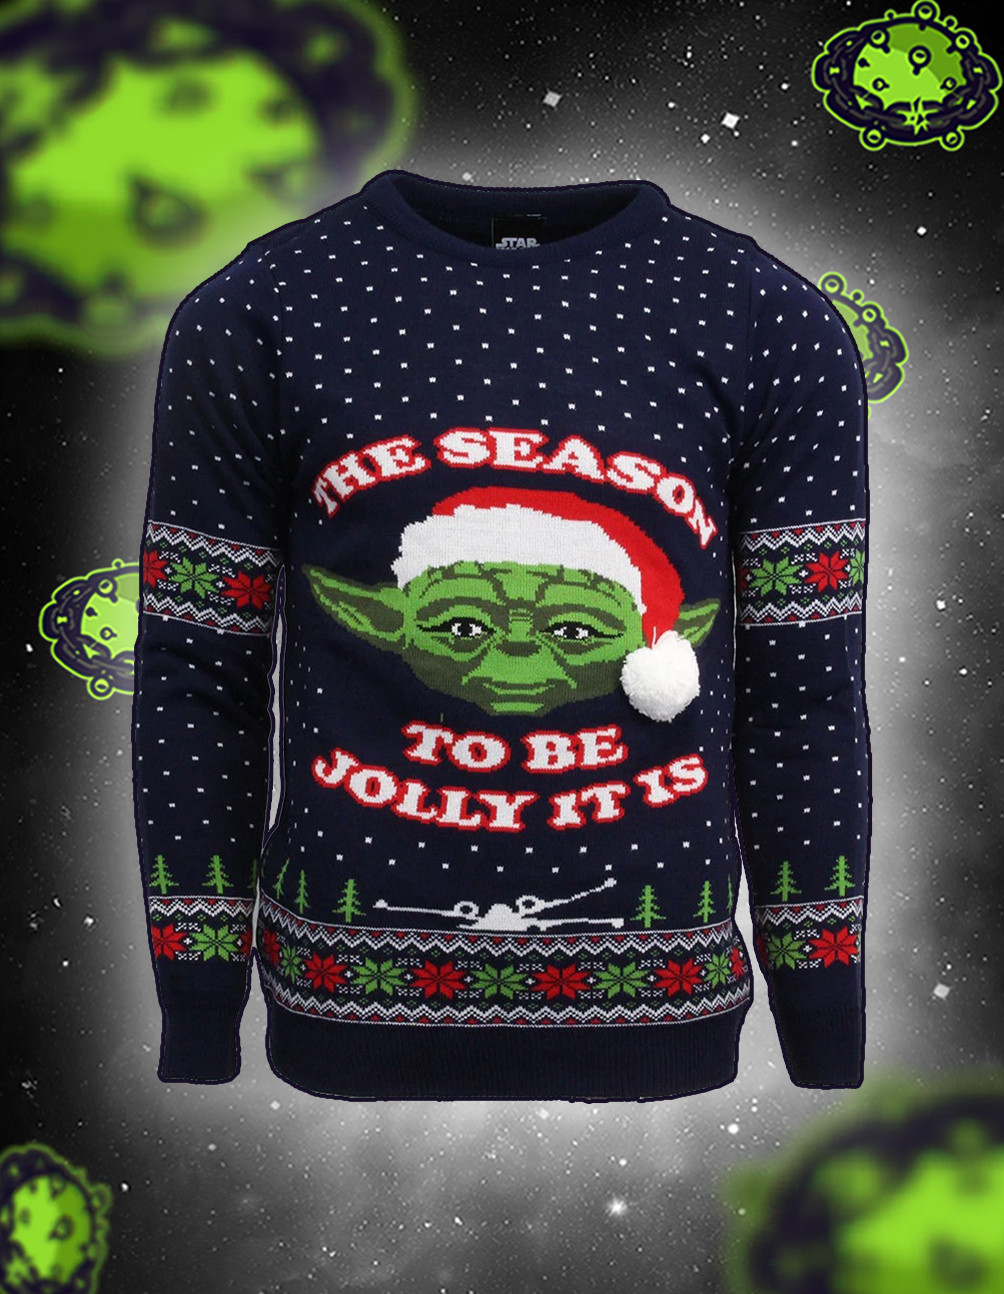 Master yoda the season to be jolly it is christmas jumper and ugly sweater